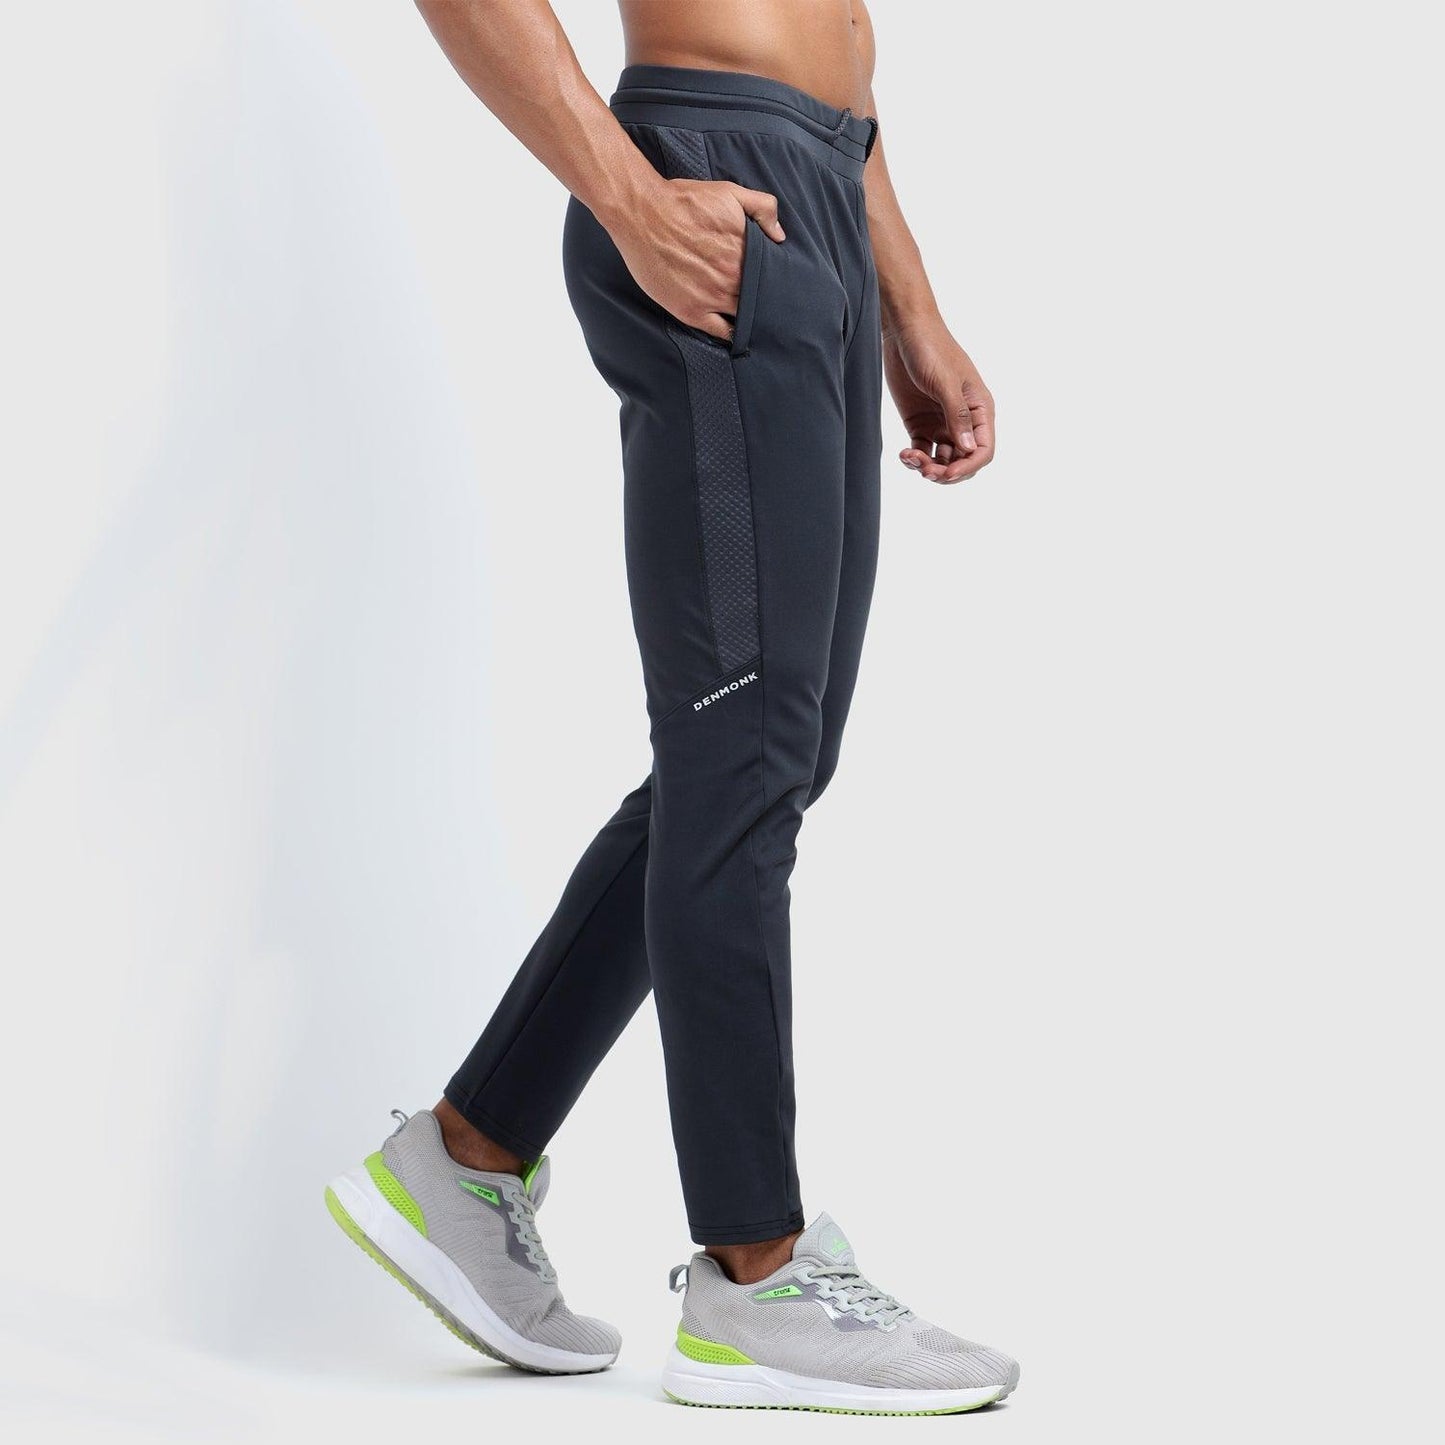 Denmonk: Elevate your look with these Urbanstribe sharp charcoal joggers for mens.